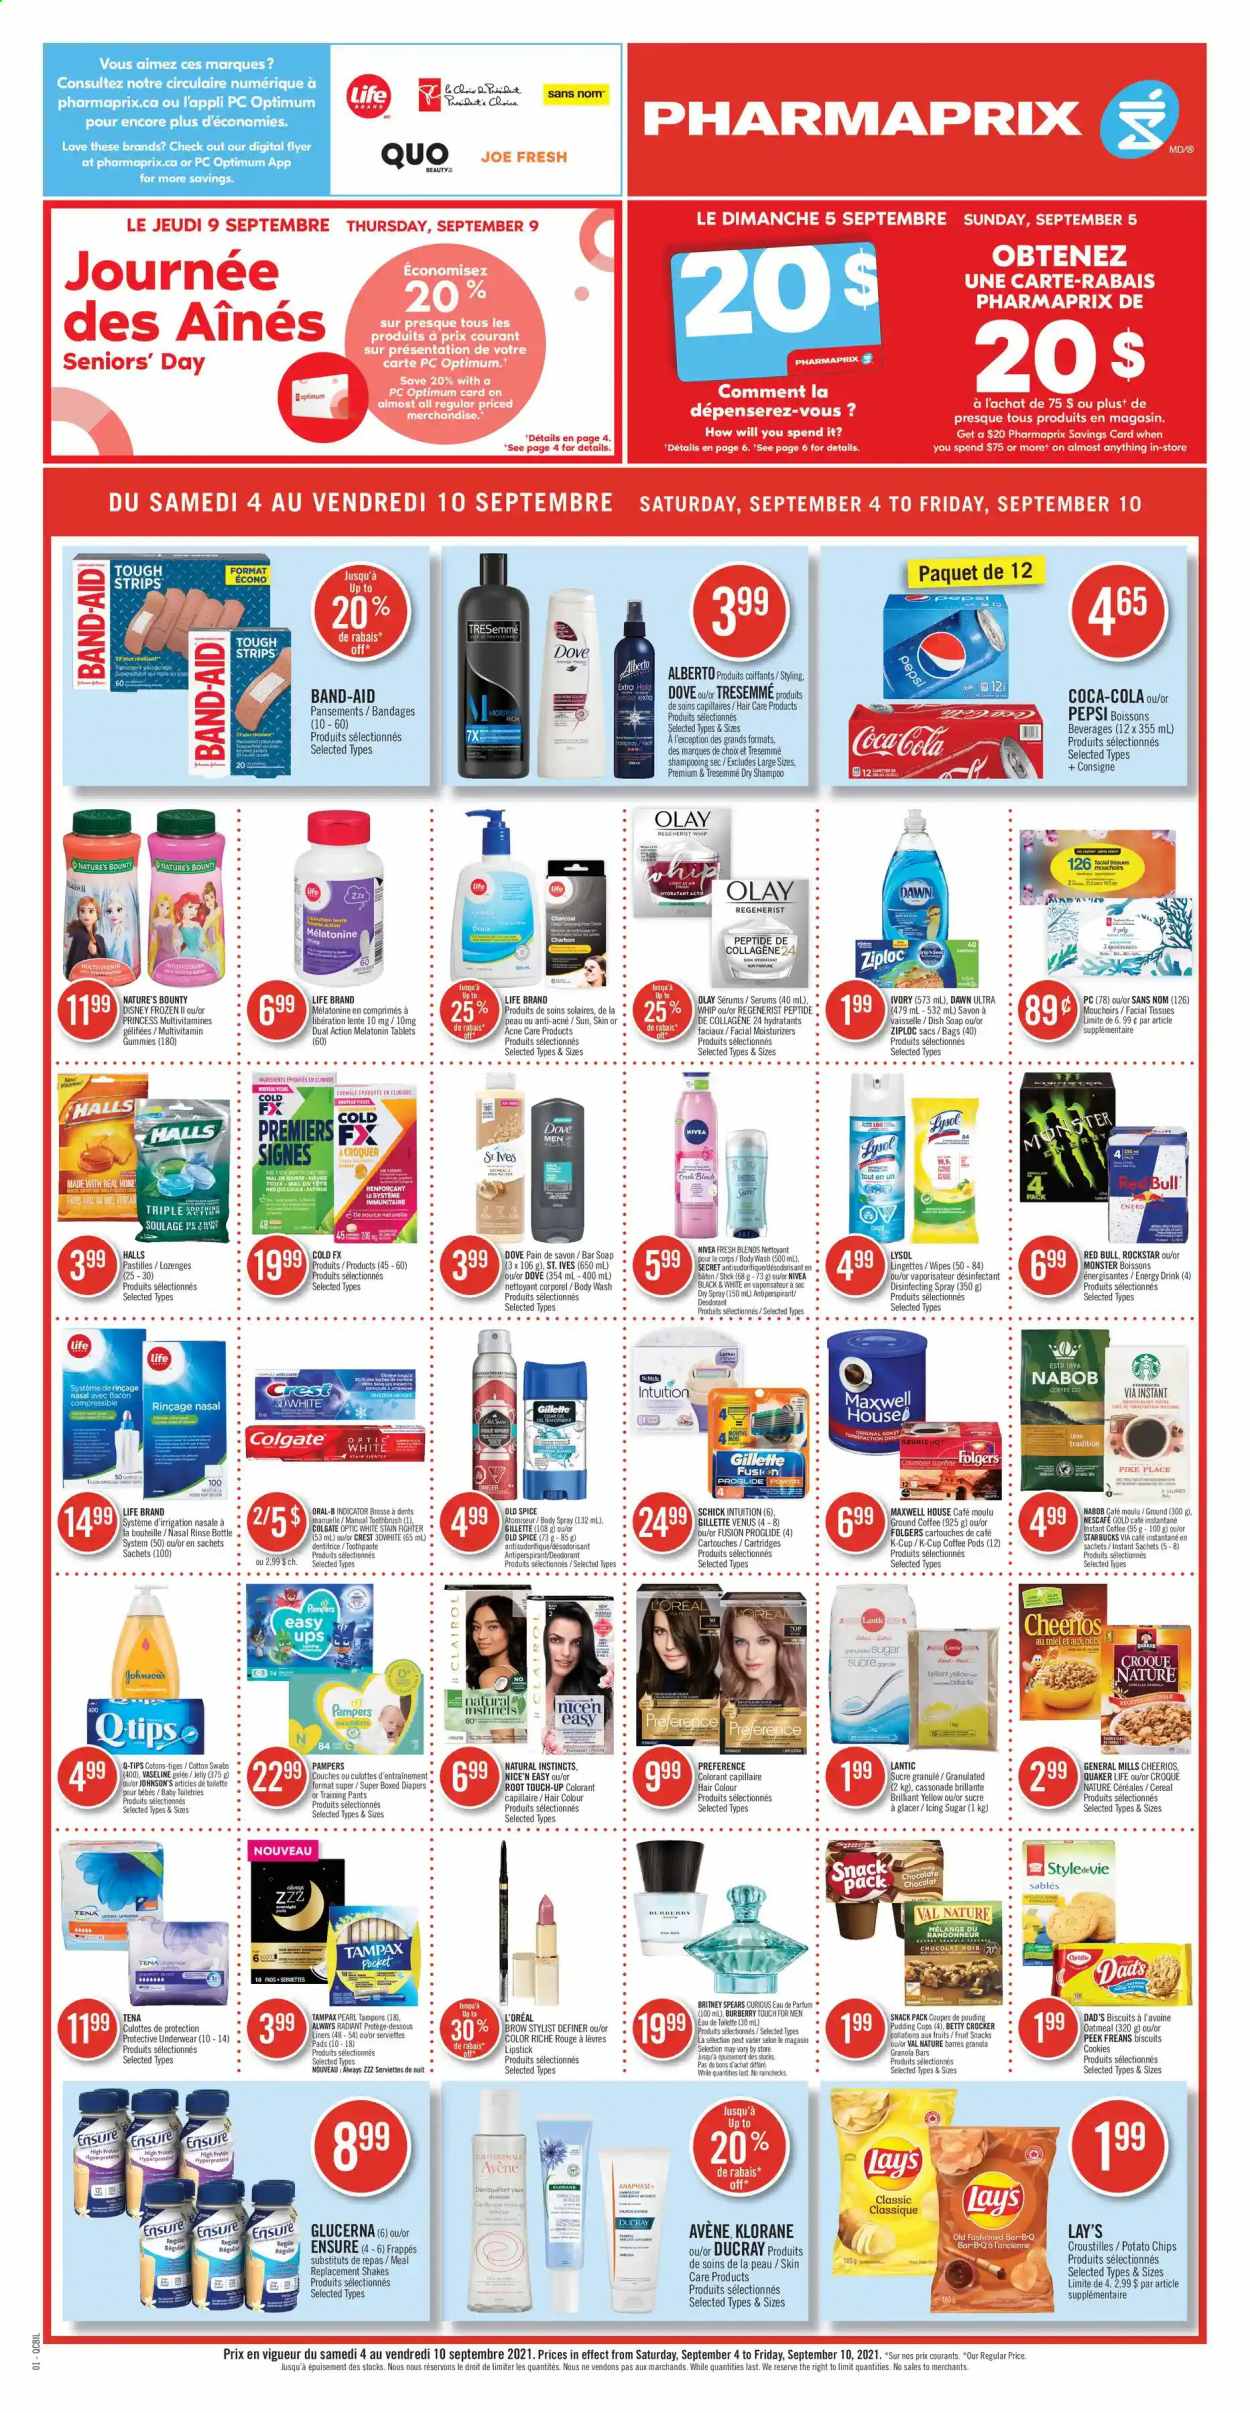 thumbnail - Pharmaprix Flyer - September 04, 2021 - September 10, 2021 - Sales products - Quaker, Disney, pudding, shake, strips, cookies, Halls, biscuit, potato chips, Lay’s, sugar, icing sugar, cereals, Cheerios, spice, Coca-Cola, Pepsi, energy drink, Monster, Red Bull, Rockstar, Maxwell House, coffee, Folgers, ground coffee, coffee capsules, K-Cups, wipes, pants, nappies, Johnson's, tissues, Lysol, body wash, Vaseline, soap bar, soap, toothpaste, Crest, facial tissues, L’Oréal, moisturizer, Olay, Root Touch-Up, TRESemmé, hair color, Klorane, body spray, Schick, Venus, Ziploc, princess, Melatonin, multivitamin, Nature's Bounty, Glucerna, band-aid, Burberry, Dove, Colgate, Gillette, Tampax, Pampers, Nivea, Old Spice, Oral-B, Nescafé. Page 1.